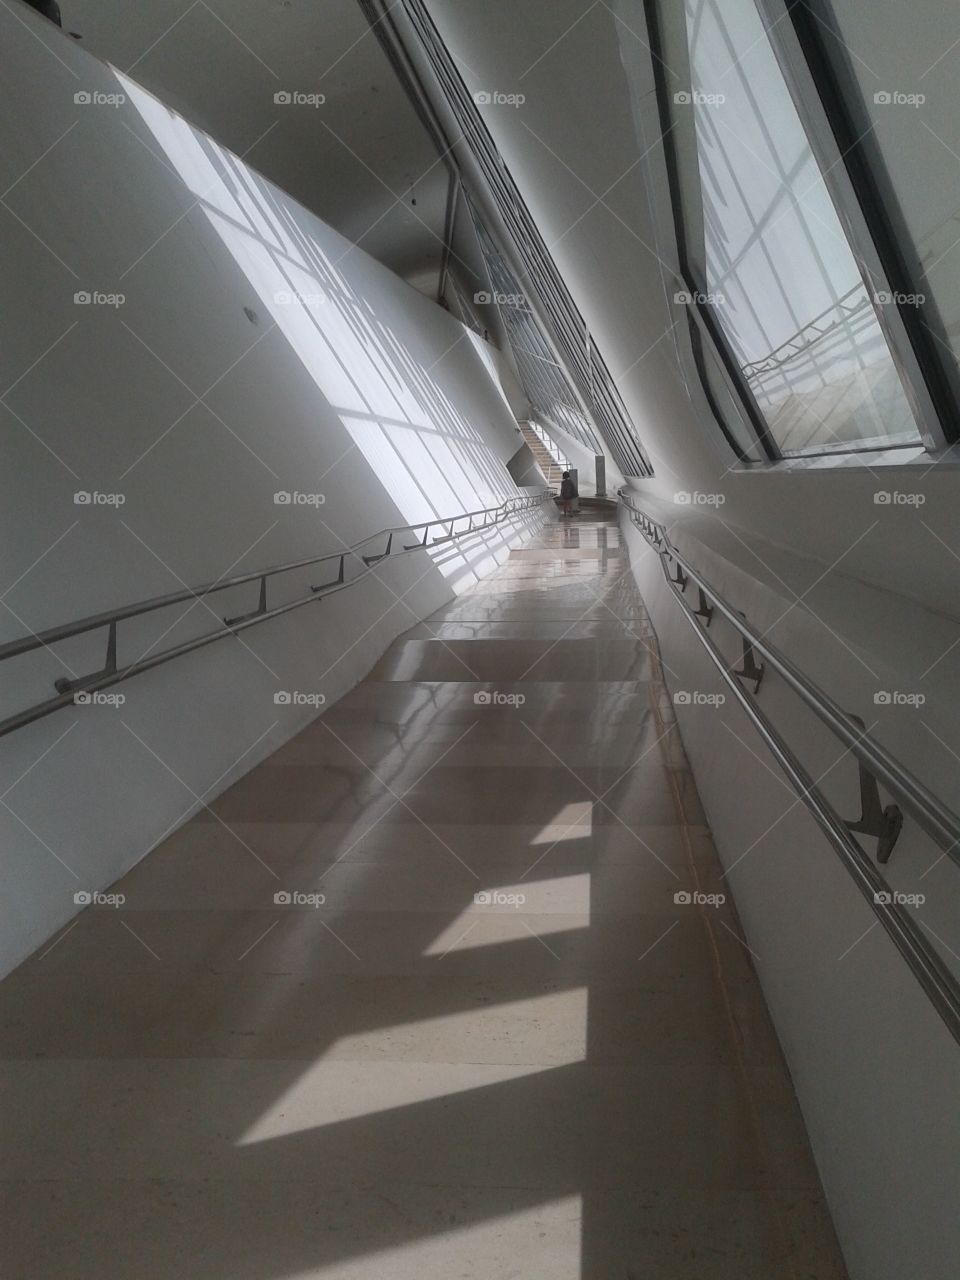 Airport, Indoors, Architecture, Hallway, Subway System